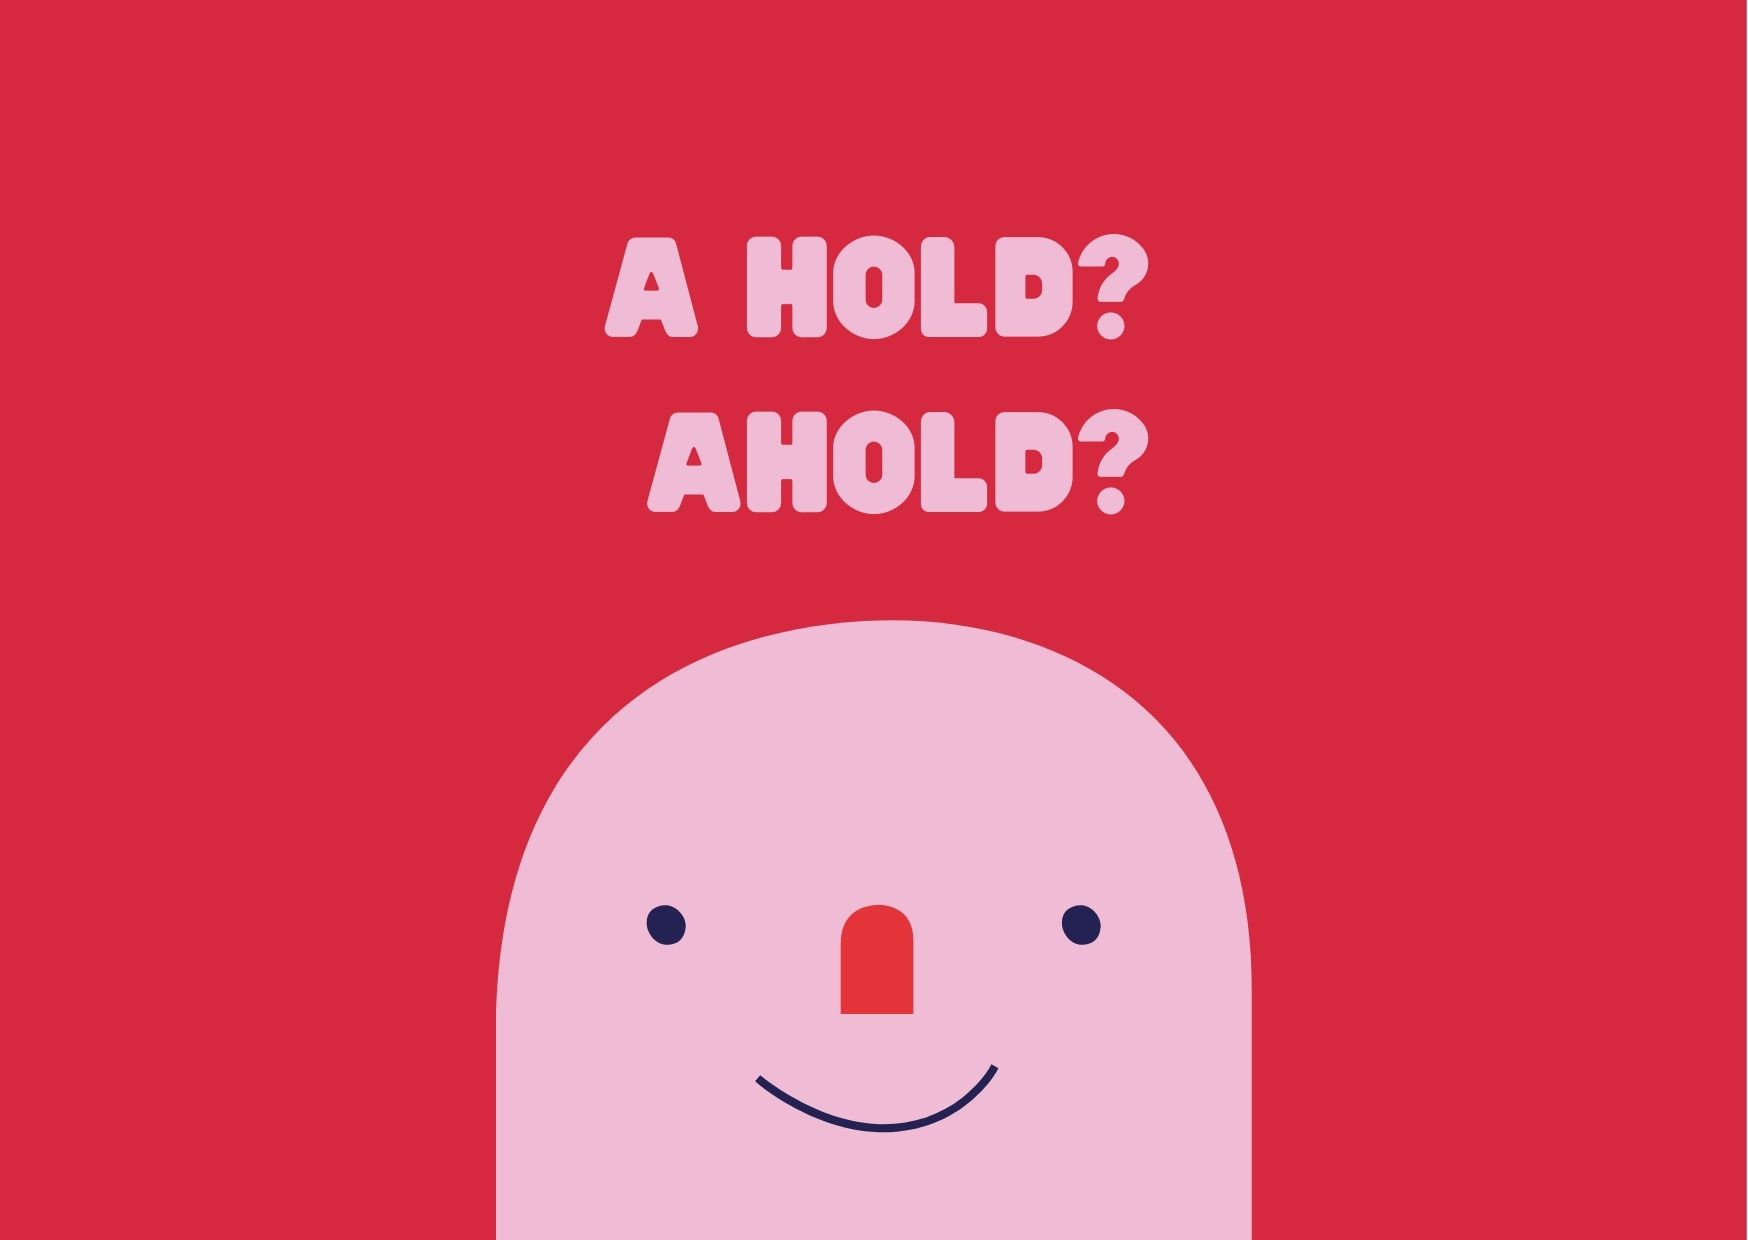 A hold vs. Ahold